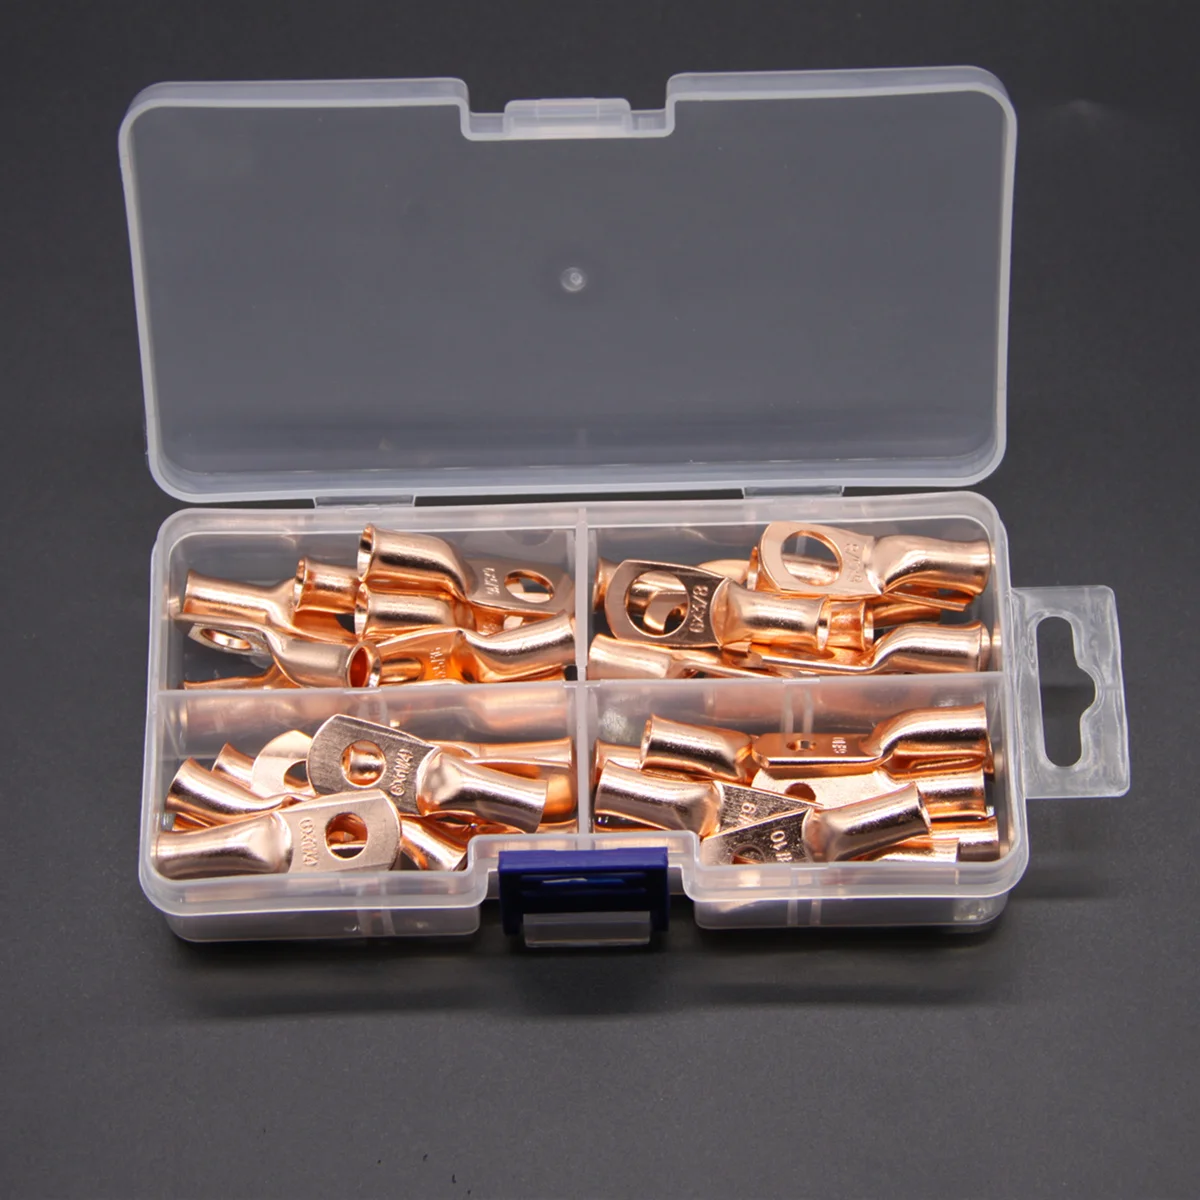 

40PCS AWG6 Assortment Wire Bare Cable Copper Connectors #10" 1/4" 5/16" 3/8" Ring Lugs Battery Electric Crimp Terminals Kit